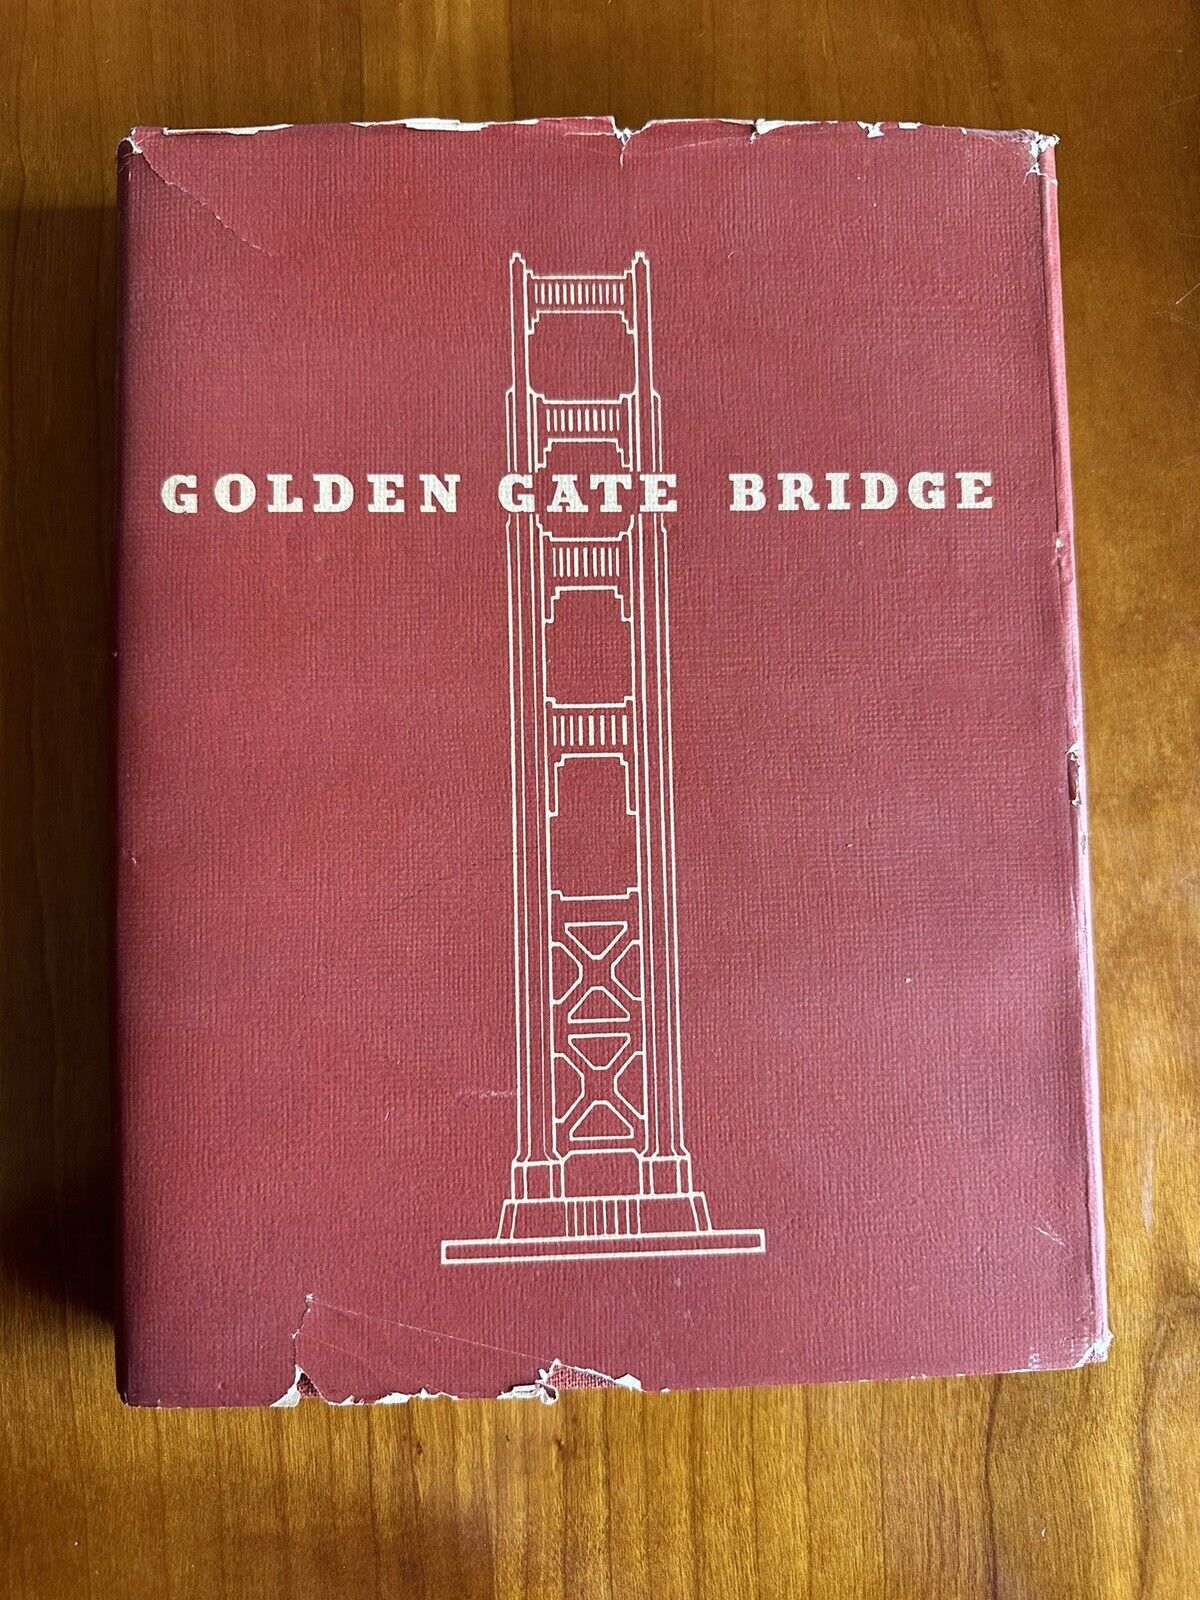 The Golden Gate Bridge: HC Report of the Engineer to the Board of Directors RARE